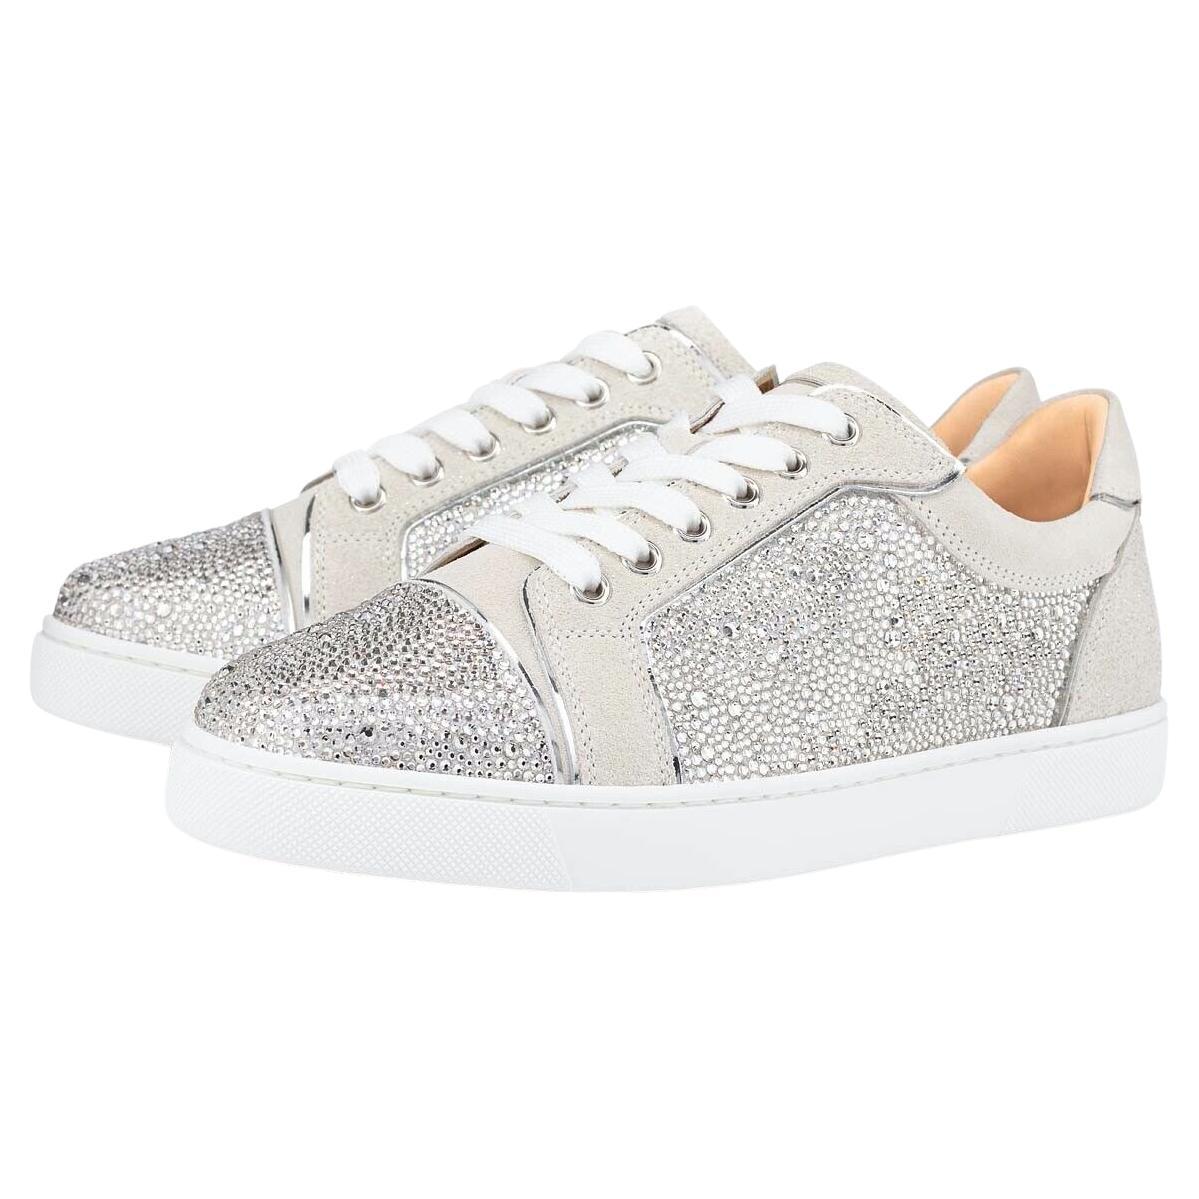 Christian Louboutin Viera Chausssures plates Lune Grey Crystal Sneakers Taille 41